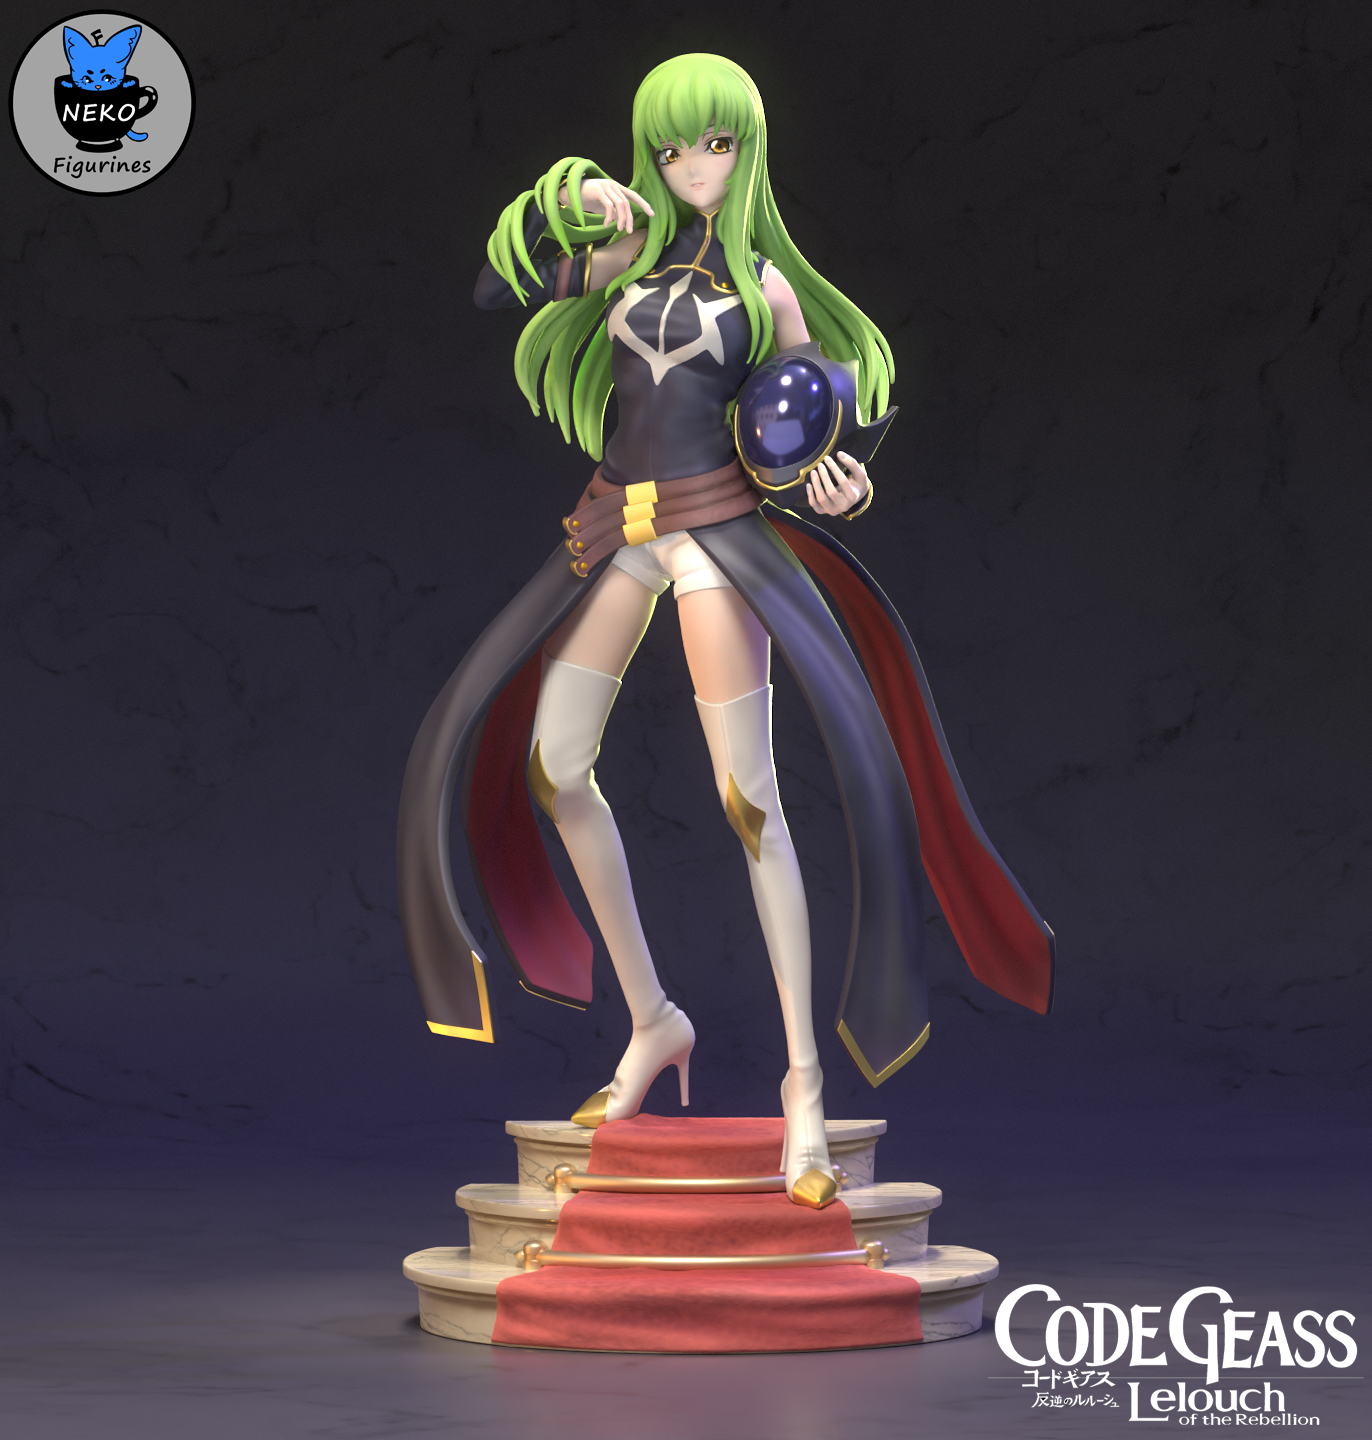 Anime Figures & Collectibles | Sideshow Collectibles